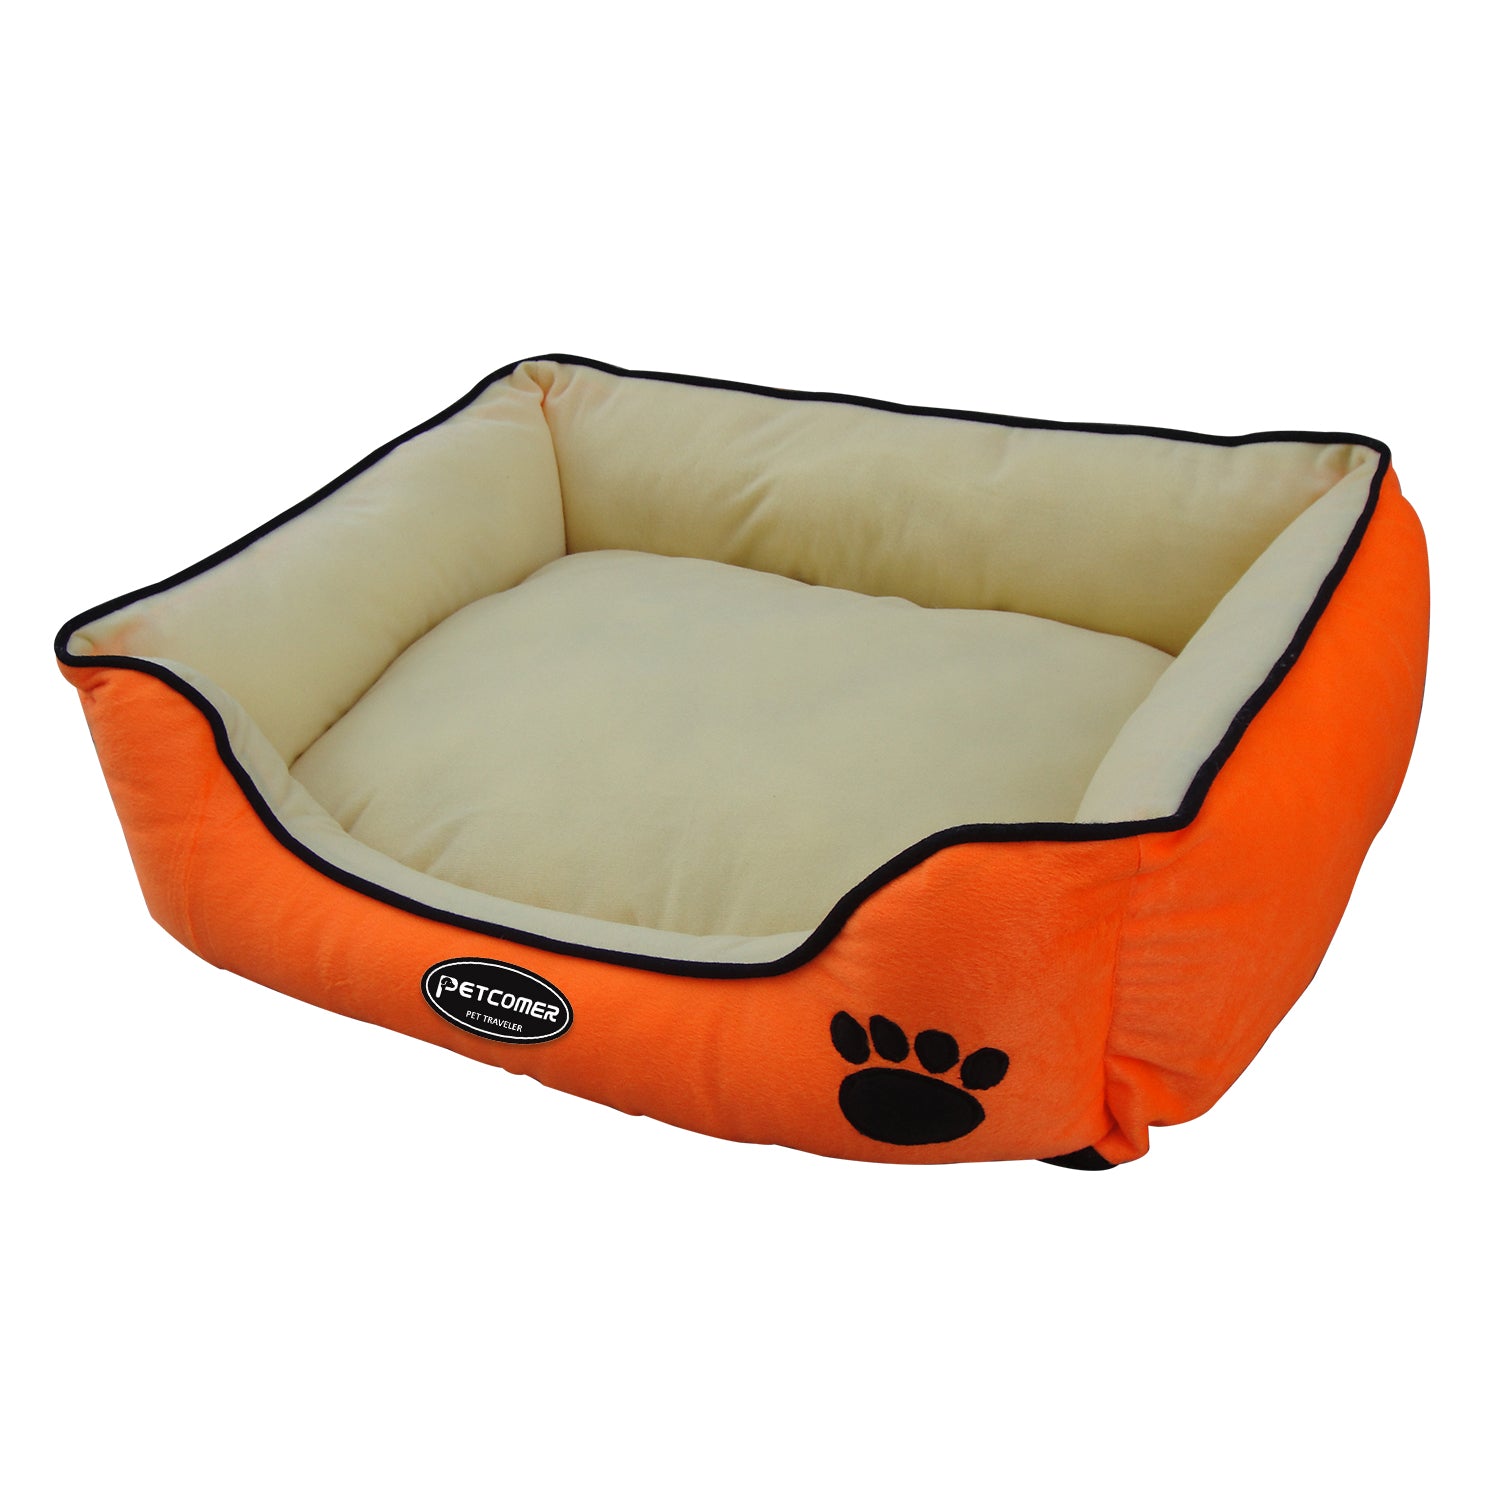 PETCOMER PET TRAVELER Pet Beds for Household, Rectangle Dog Bed for Medium Small Dogs, 20"L x 19"W x 6"Th